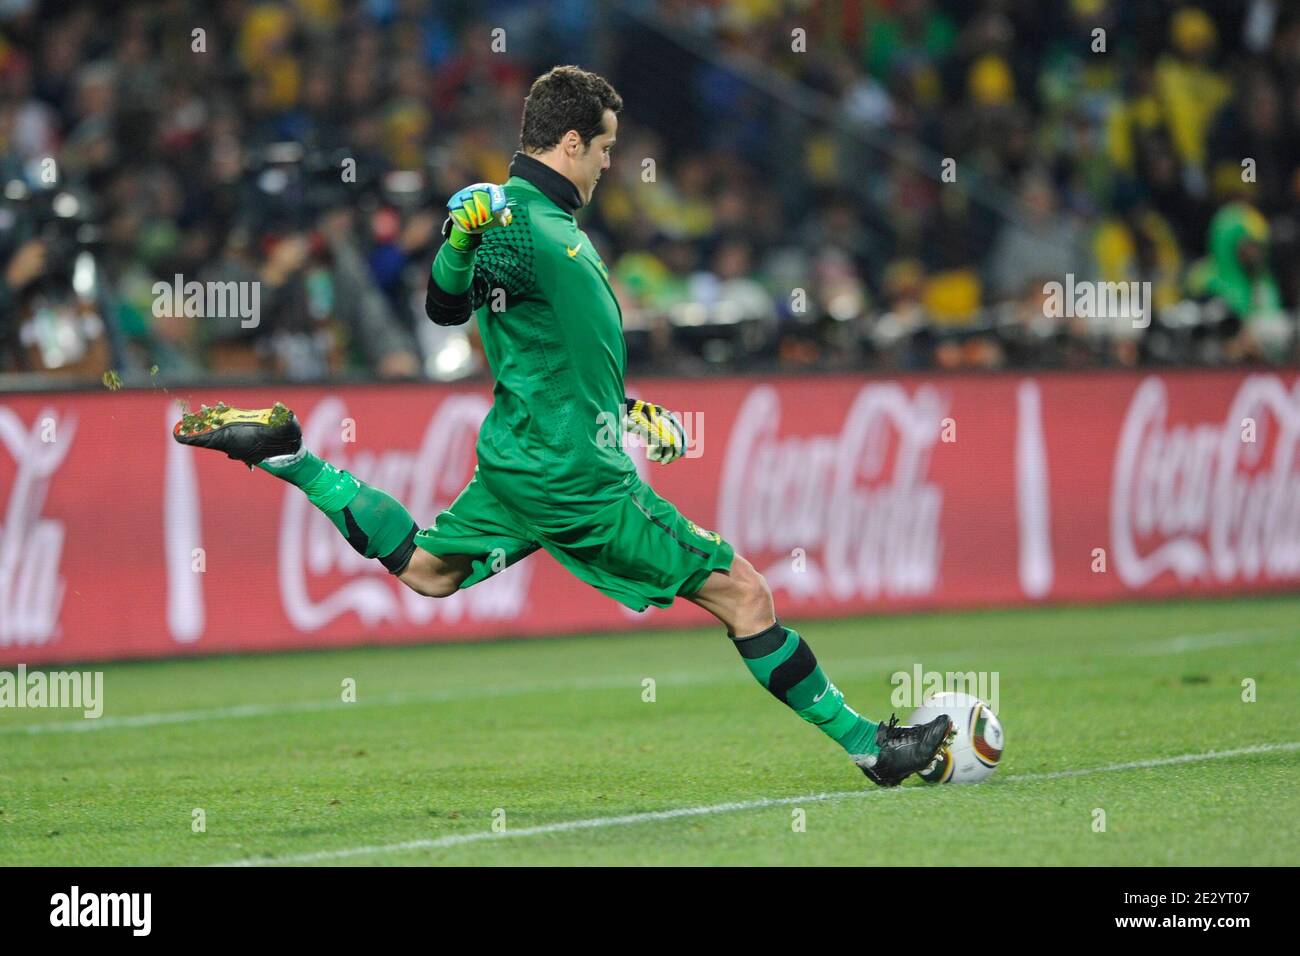 Brazil's Julio Cesar during the 2010 FIFA World Cup South Africa 1/8 of final Soccer match, Brazil vs Chile at Ellis Park football stadium in Johannesburg, South Africa on June 28, 2010. Brazil won 3-0. Photo by Henri Szwarc/Cameleon/ABACAPRESS.COM Stock Photo